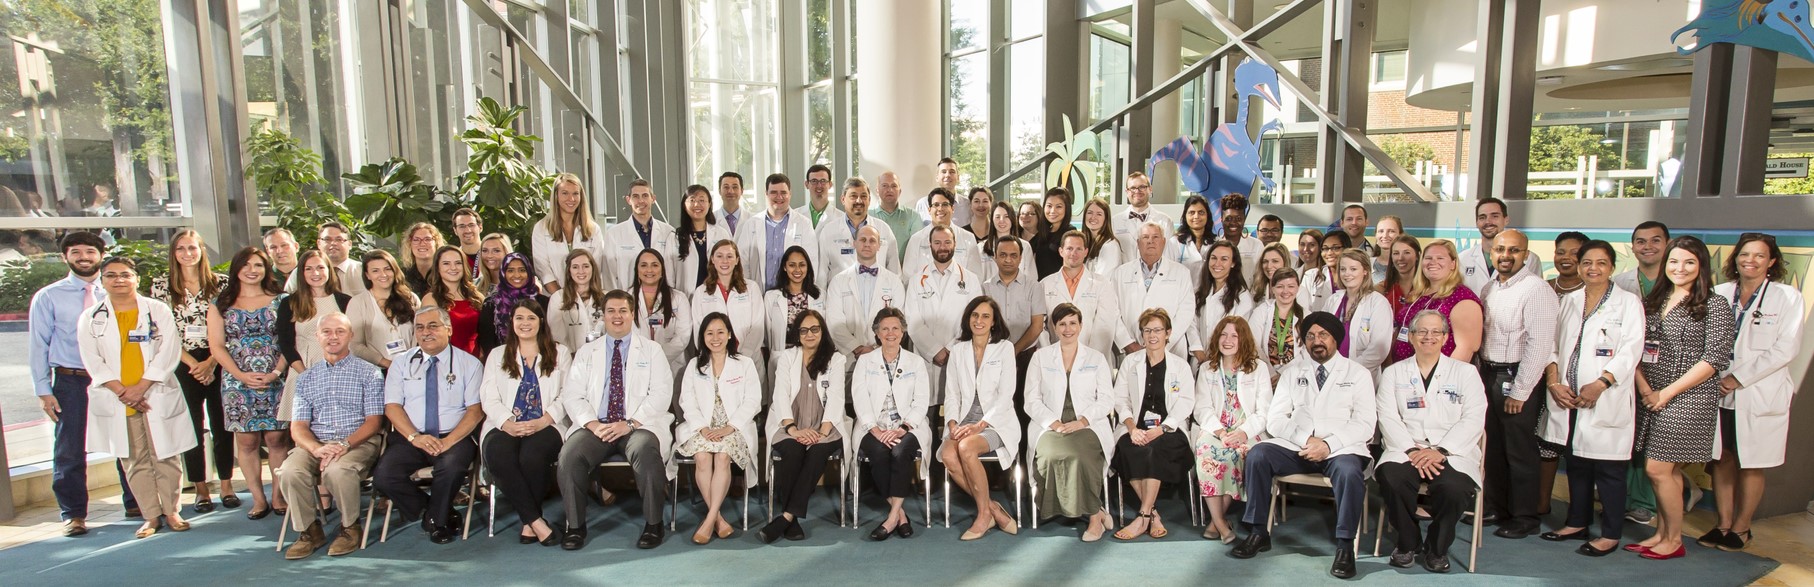 Pediatric Faculty and Housestaff 2020-2021